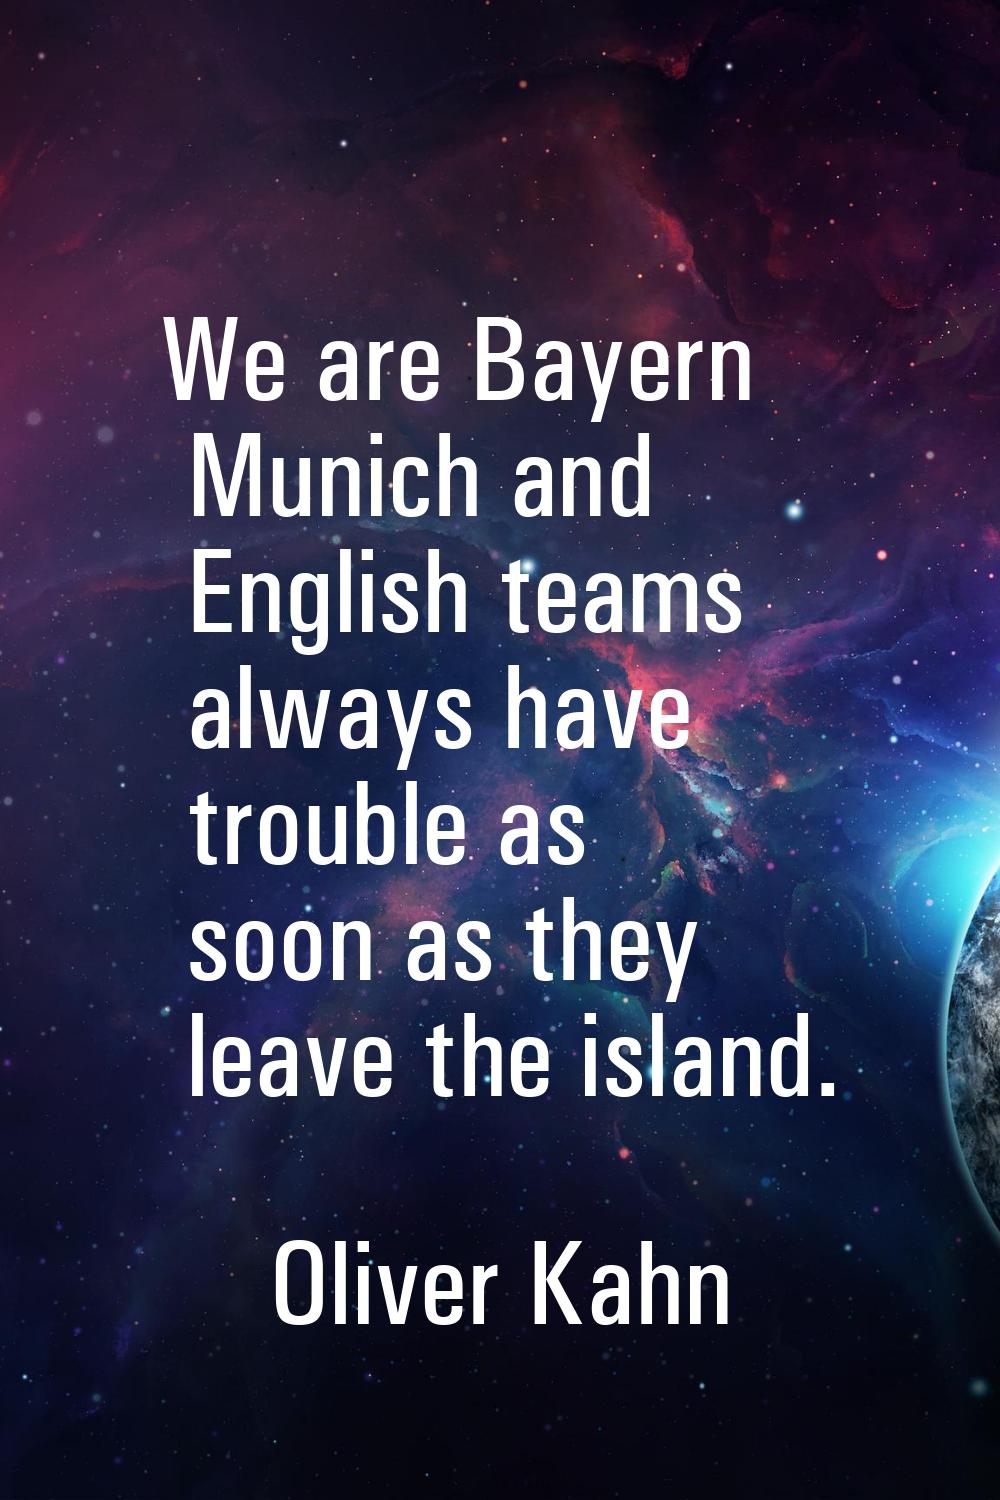 We are Bayern Munich and English teams always have trouble as soon as they leave the island.